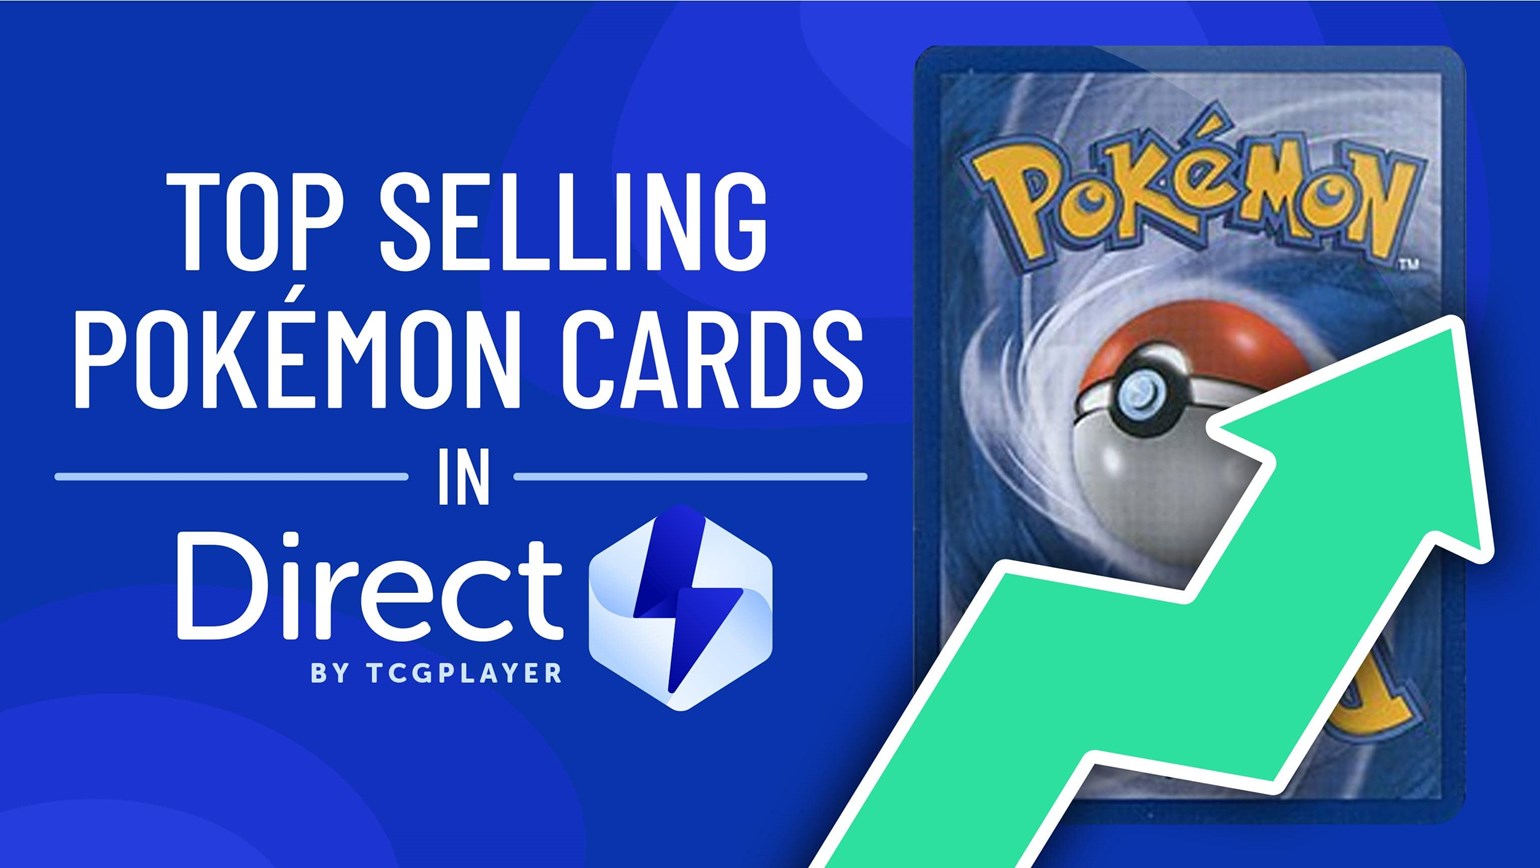 July Top Selling Pokémon Cards Under $25 in Direct by TCGplayer